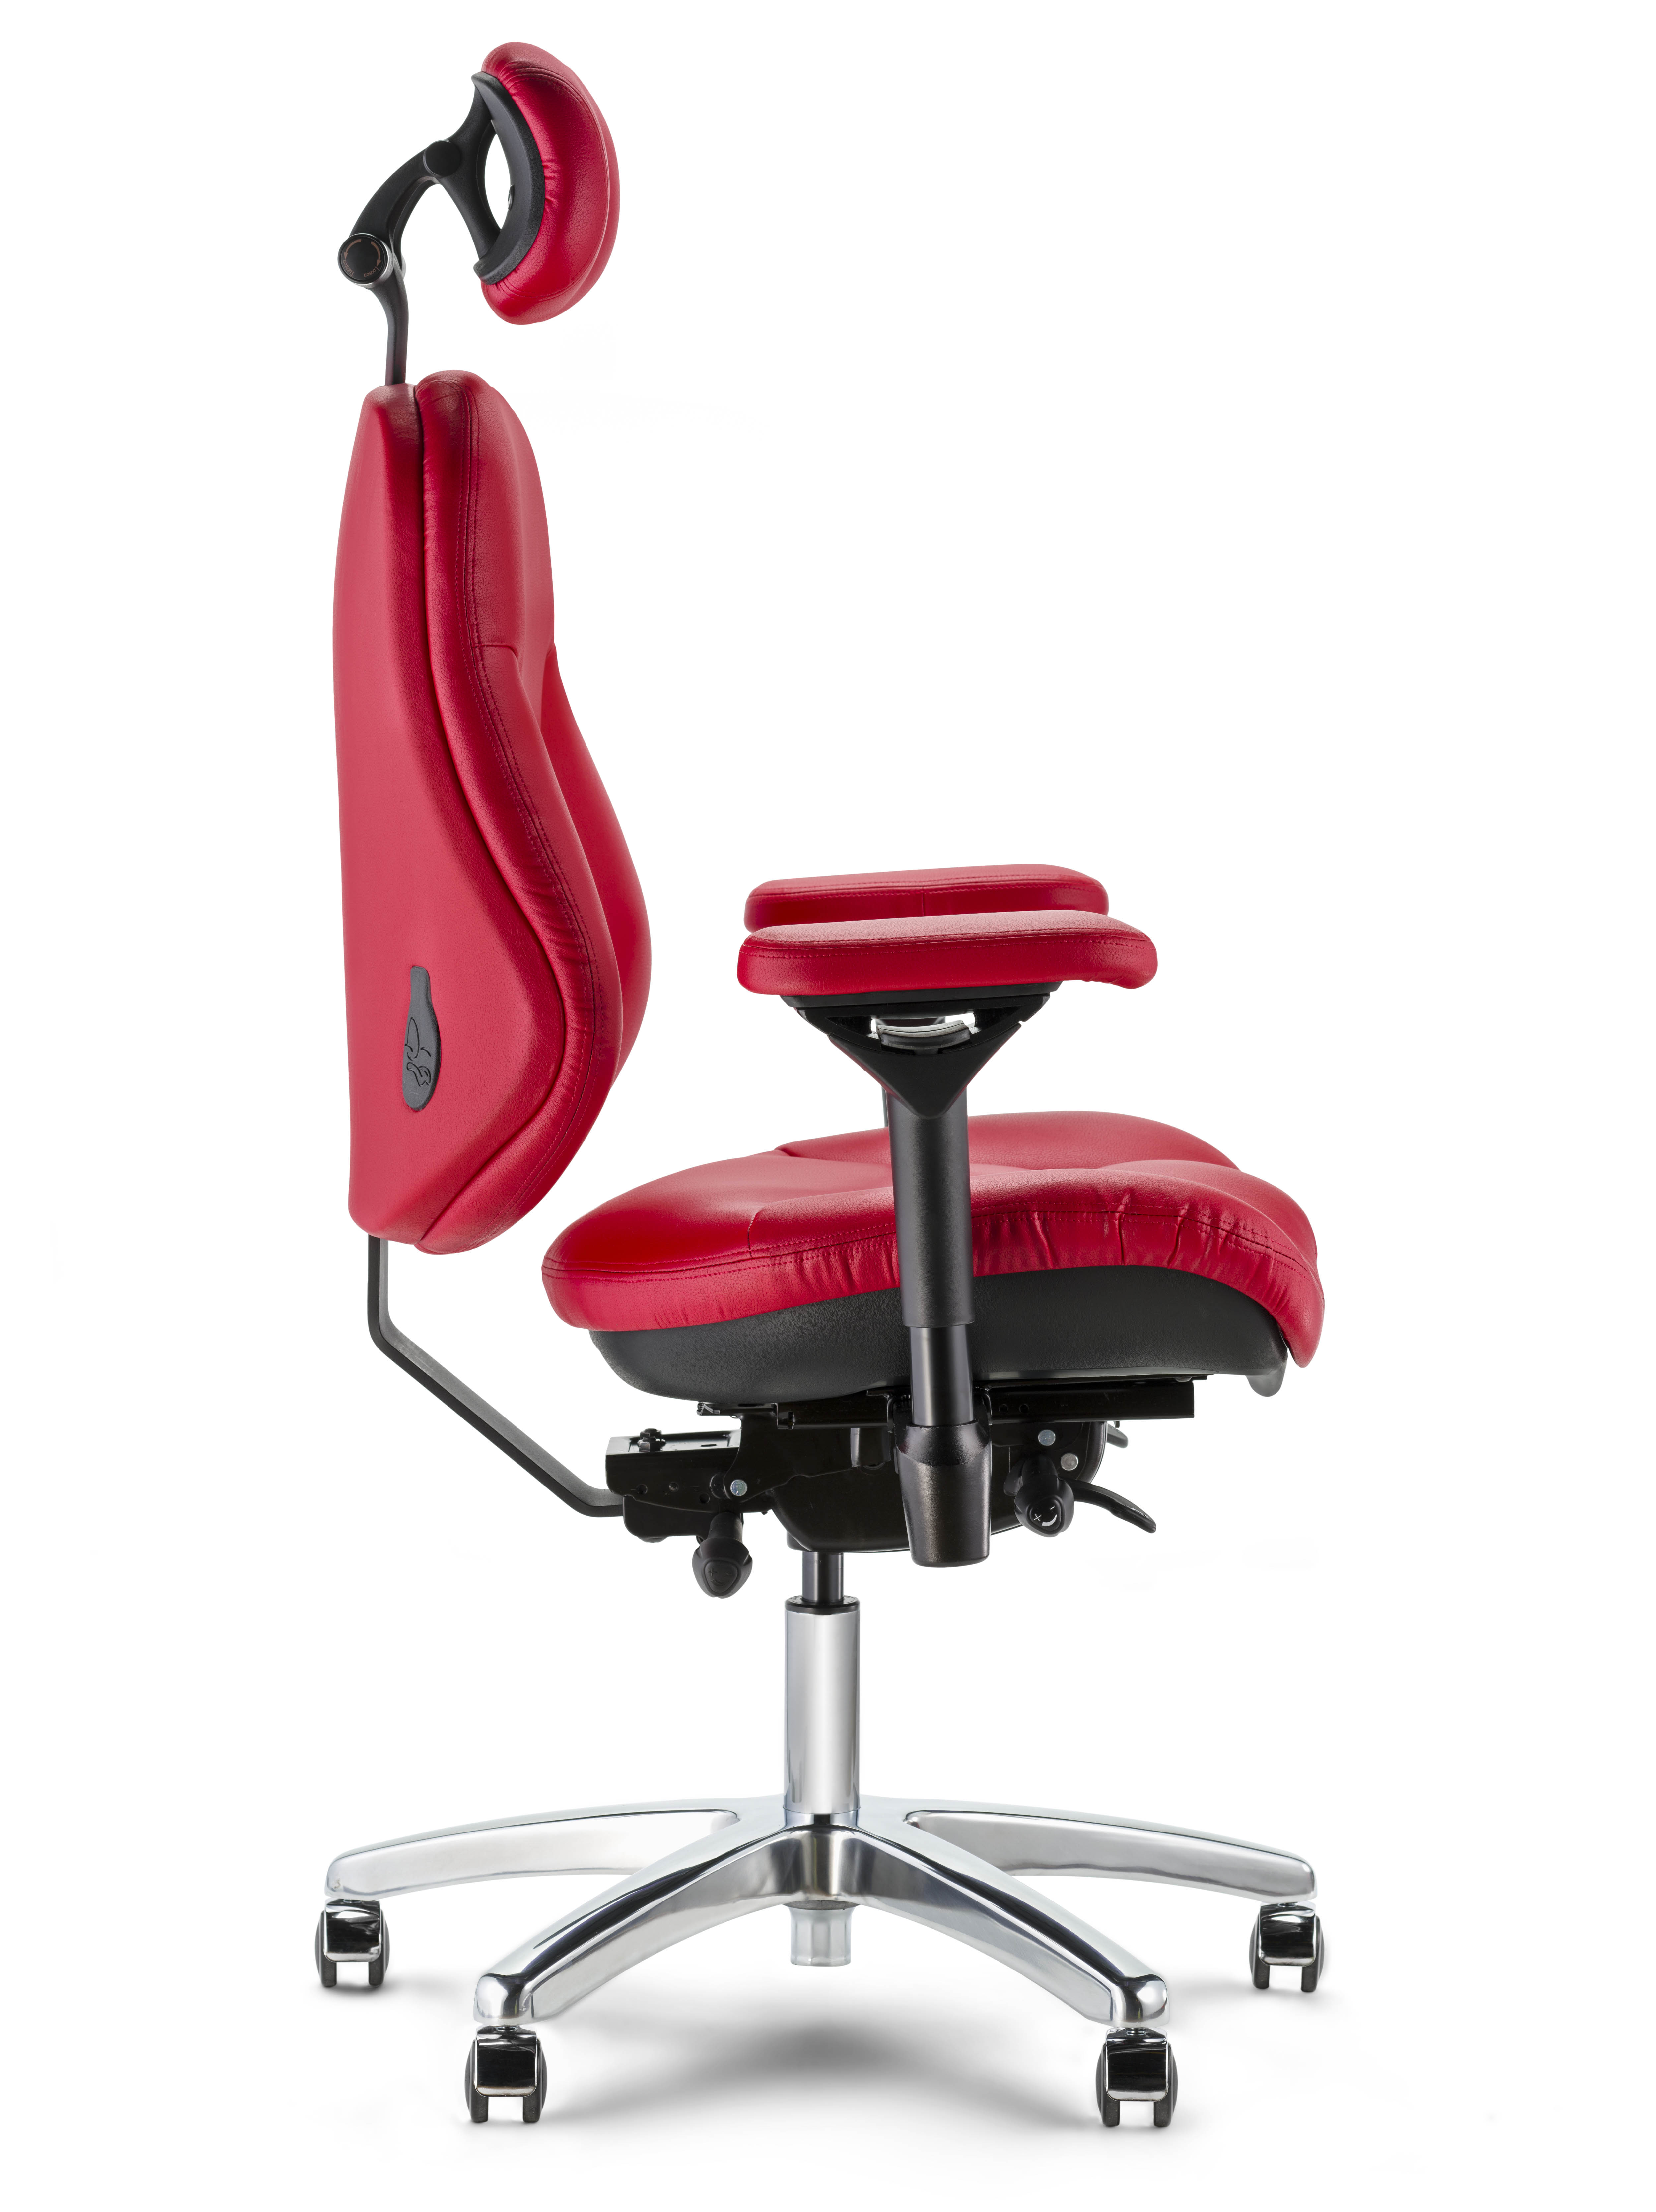 R3507 S1 executive chair chrome base Brisa Rose Red side view